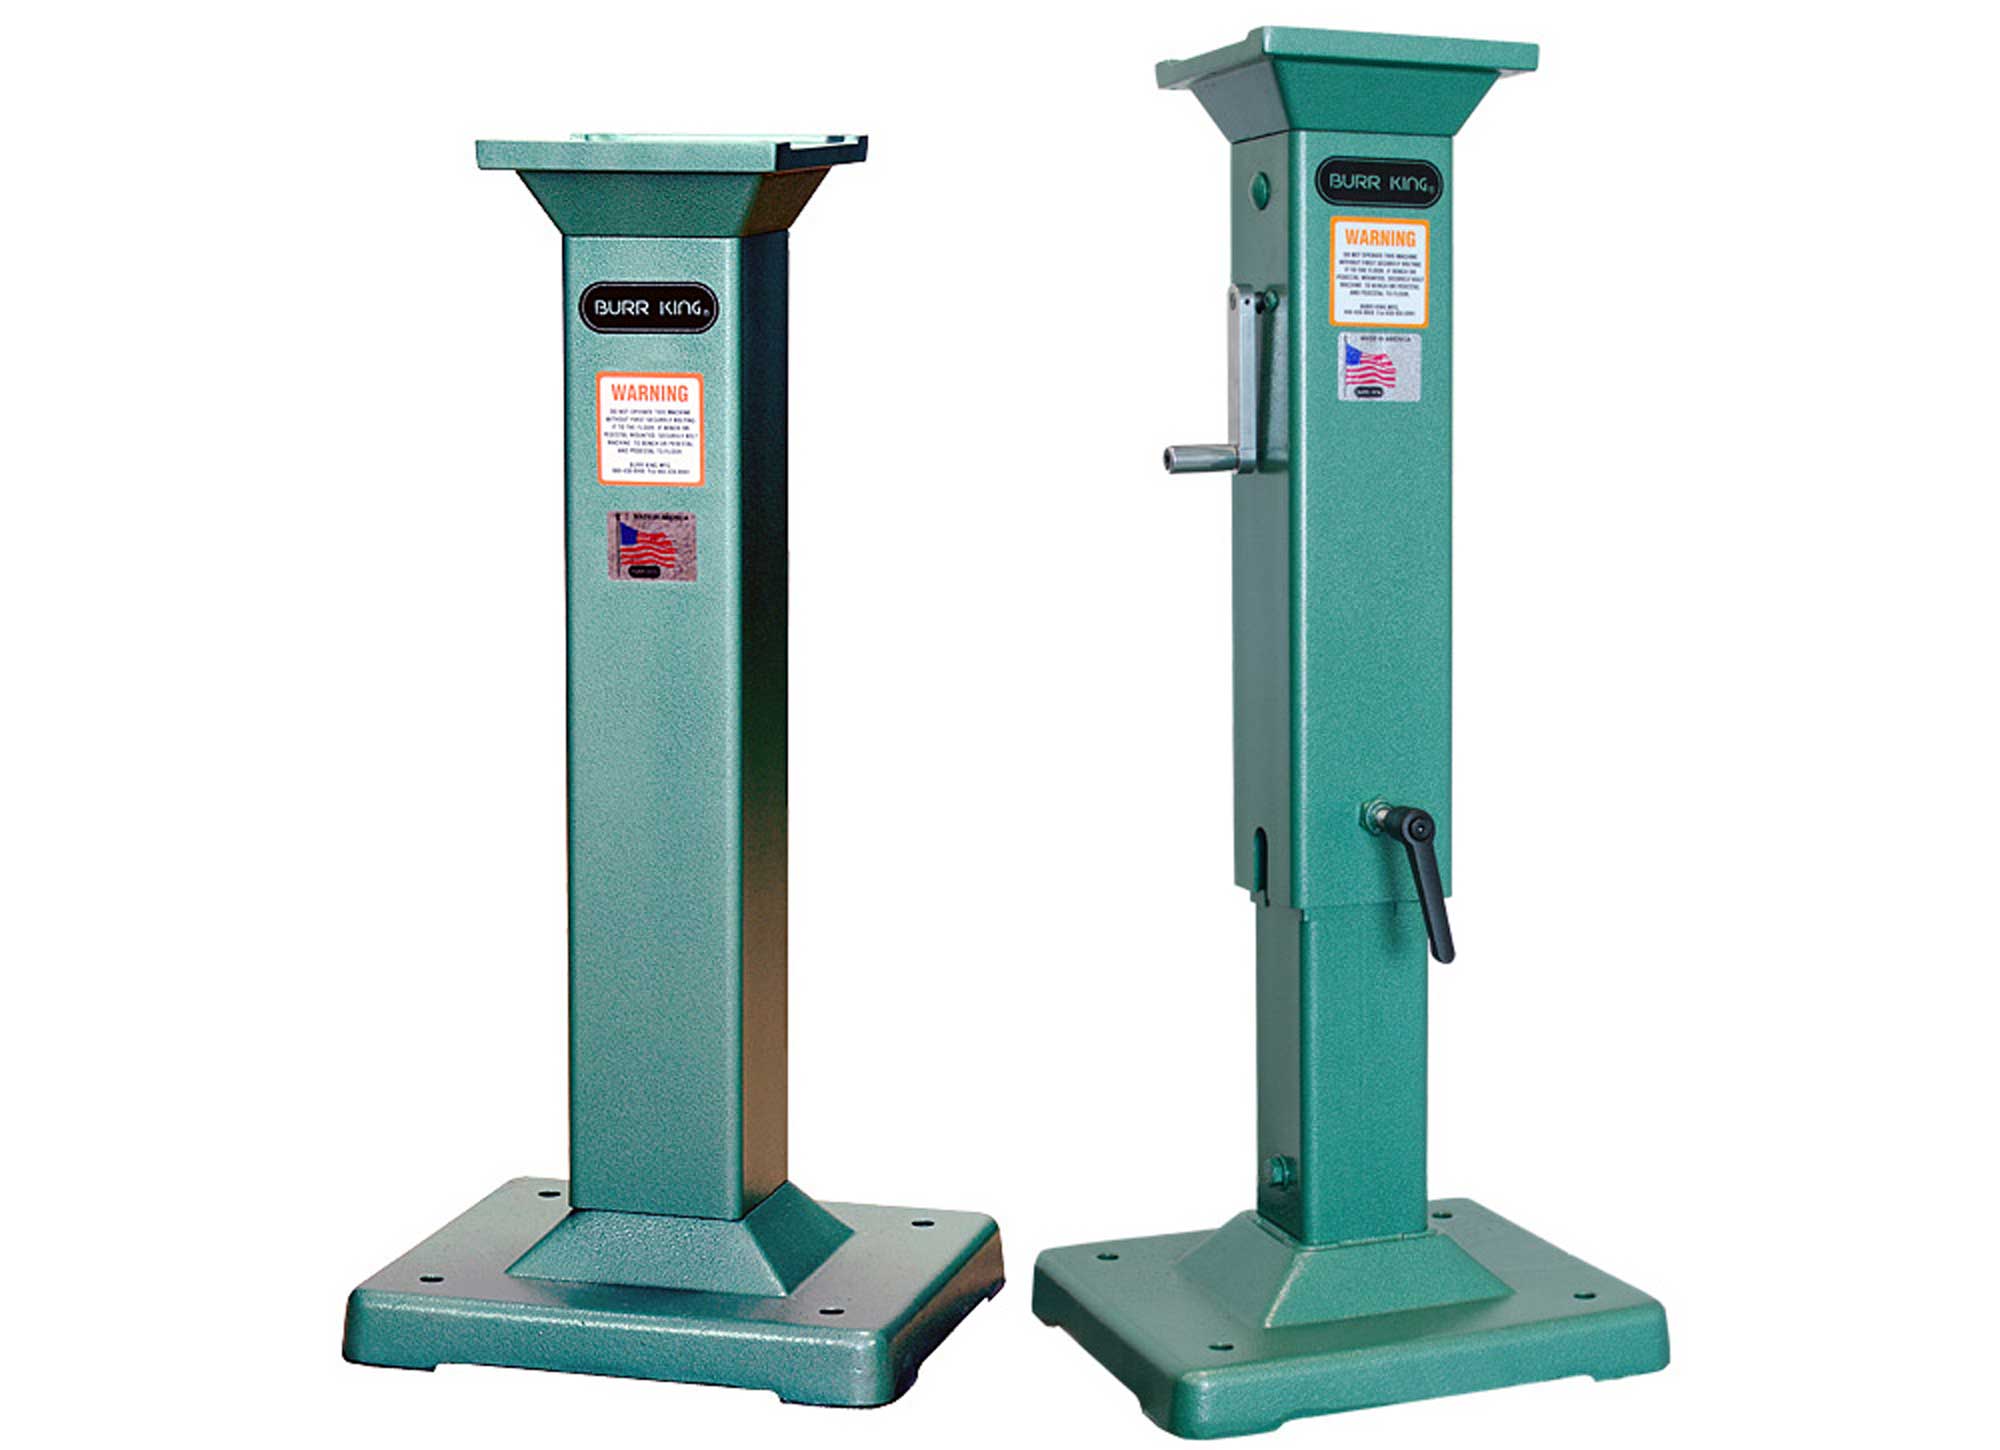 Optional fixed or adjustable height pedestal available.